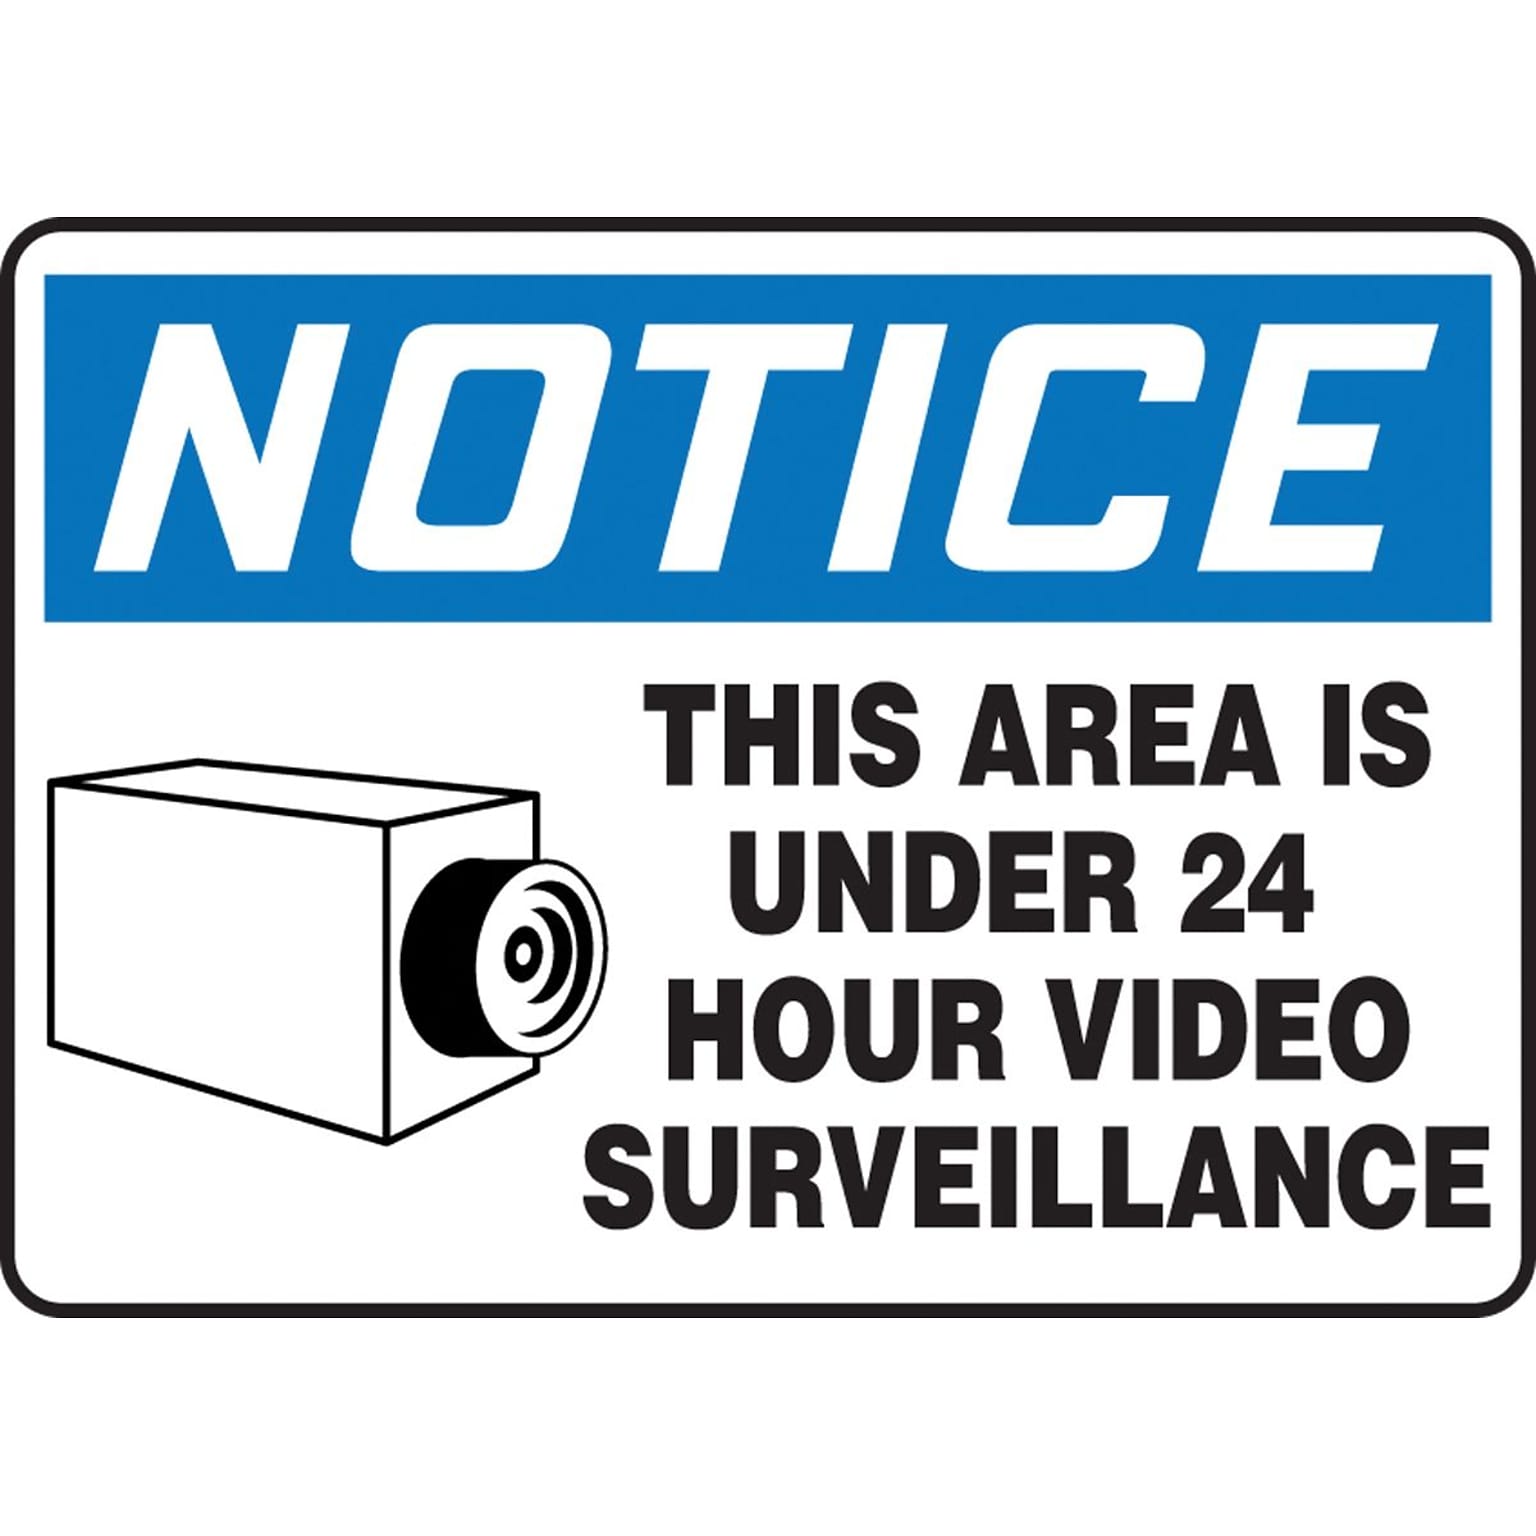 Accuform 10 x 14 Plastic Safety Sign NOTICE THIS AREA IS..W/GRAPHIC, Blue/Black On White (MASE807VP)